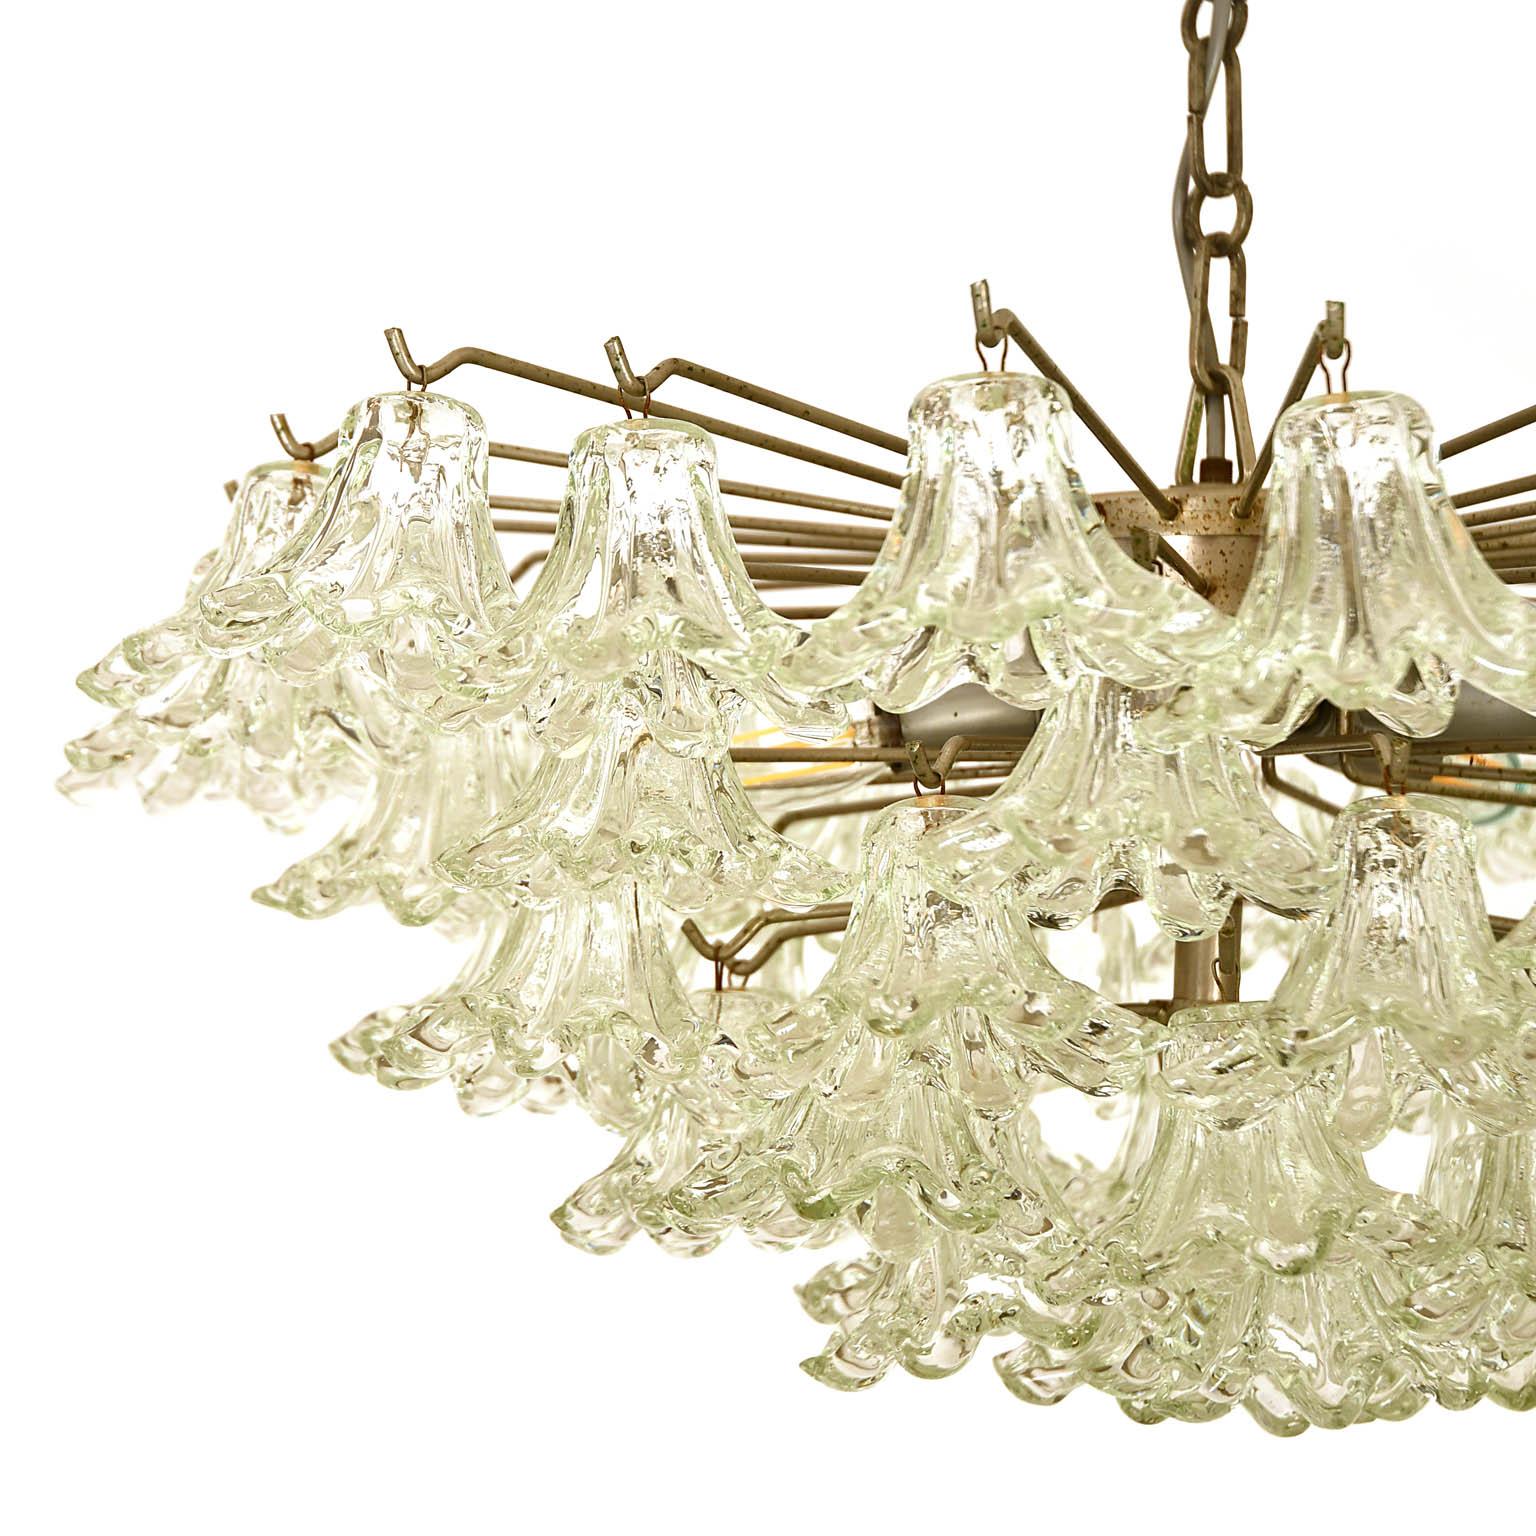 Mid-20th Century Italian Mid-Century Chandelier with Glass Blossoms, 1955, Murano For Sale